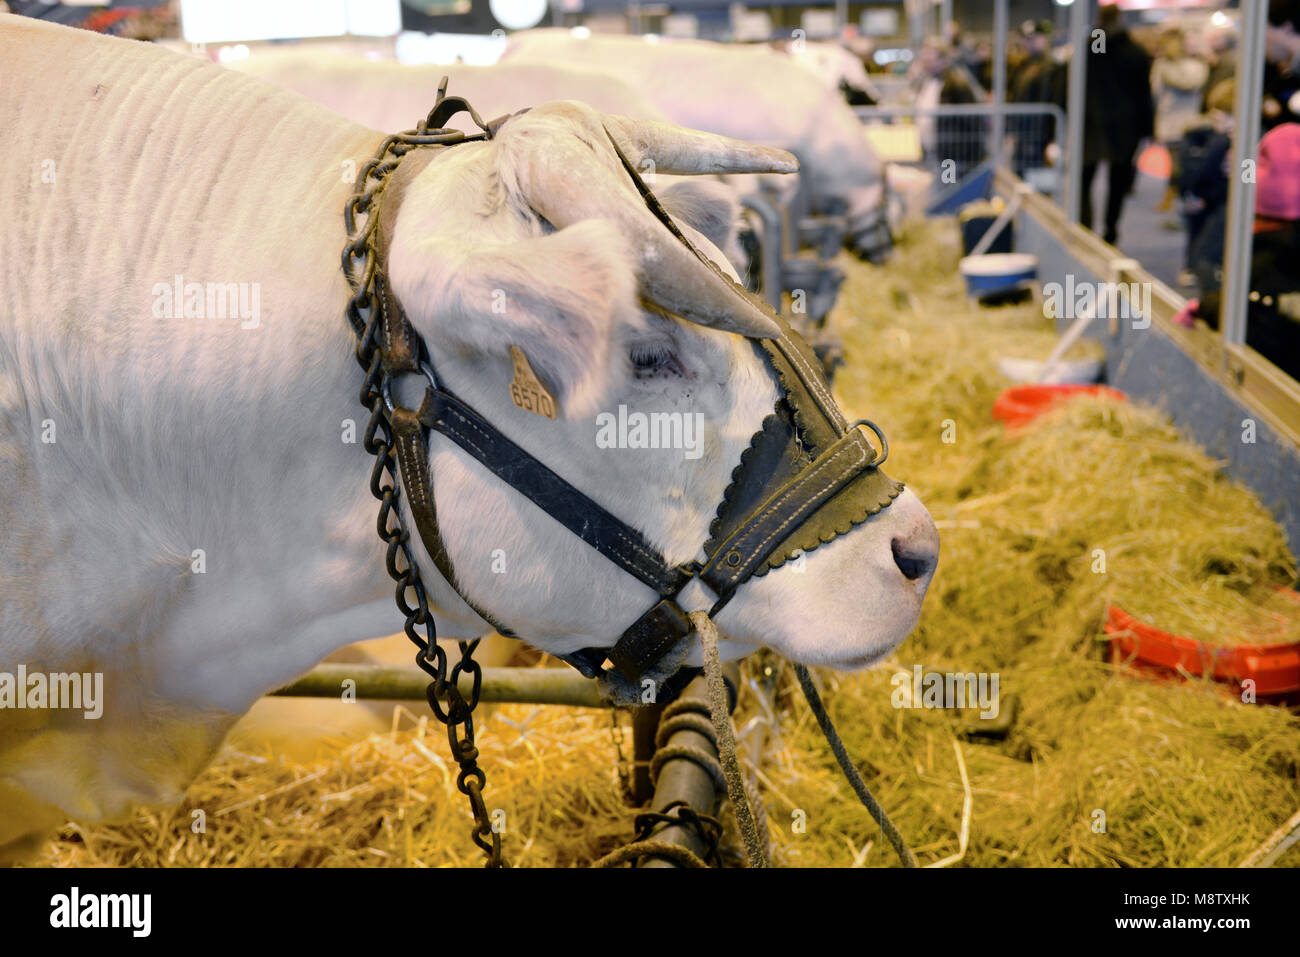 Charolais Beef Cattle or Bull in Cow Pen or Animal Stall at the Paris International Agricultural Show Stock Photo